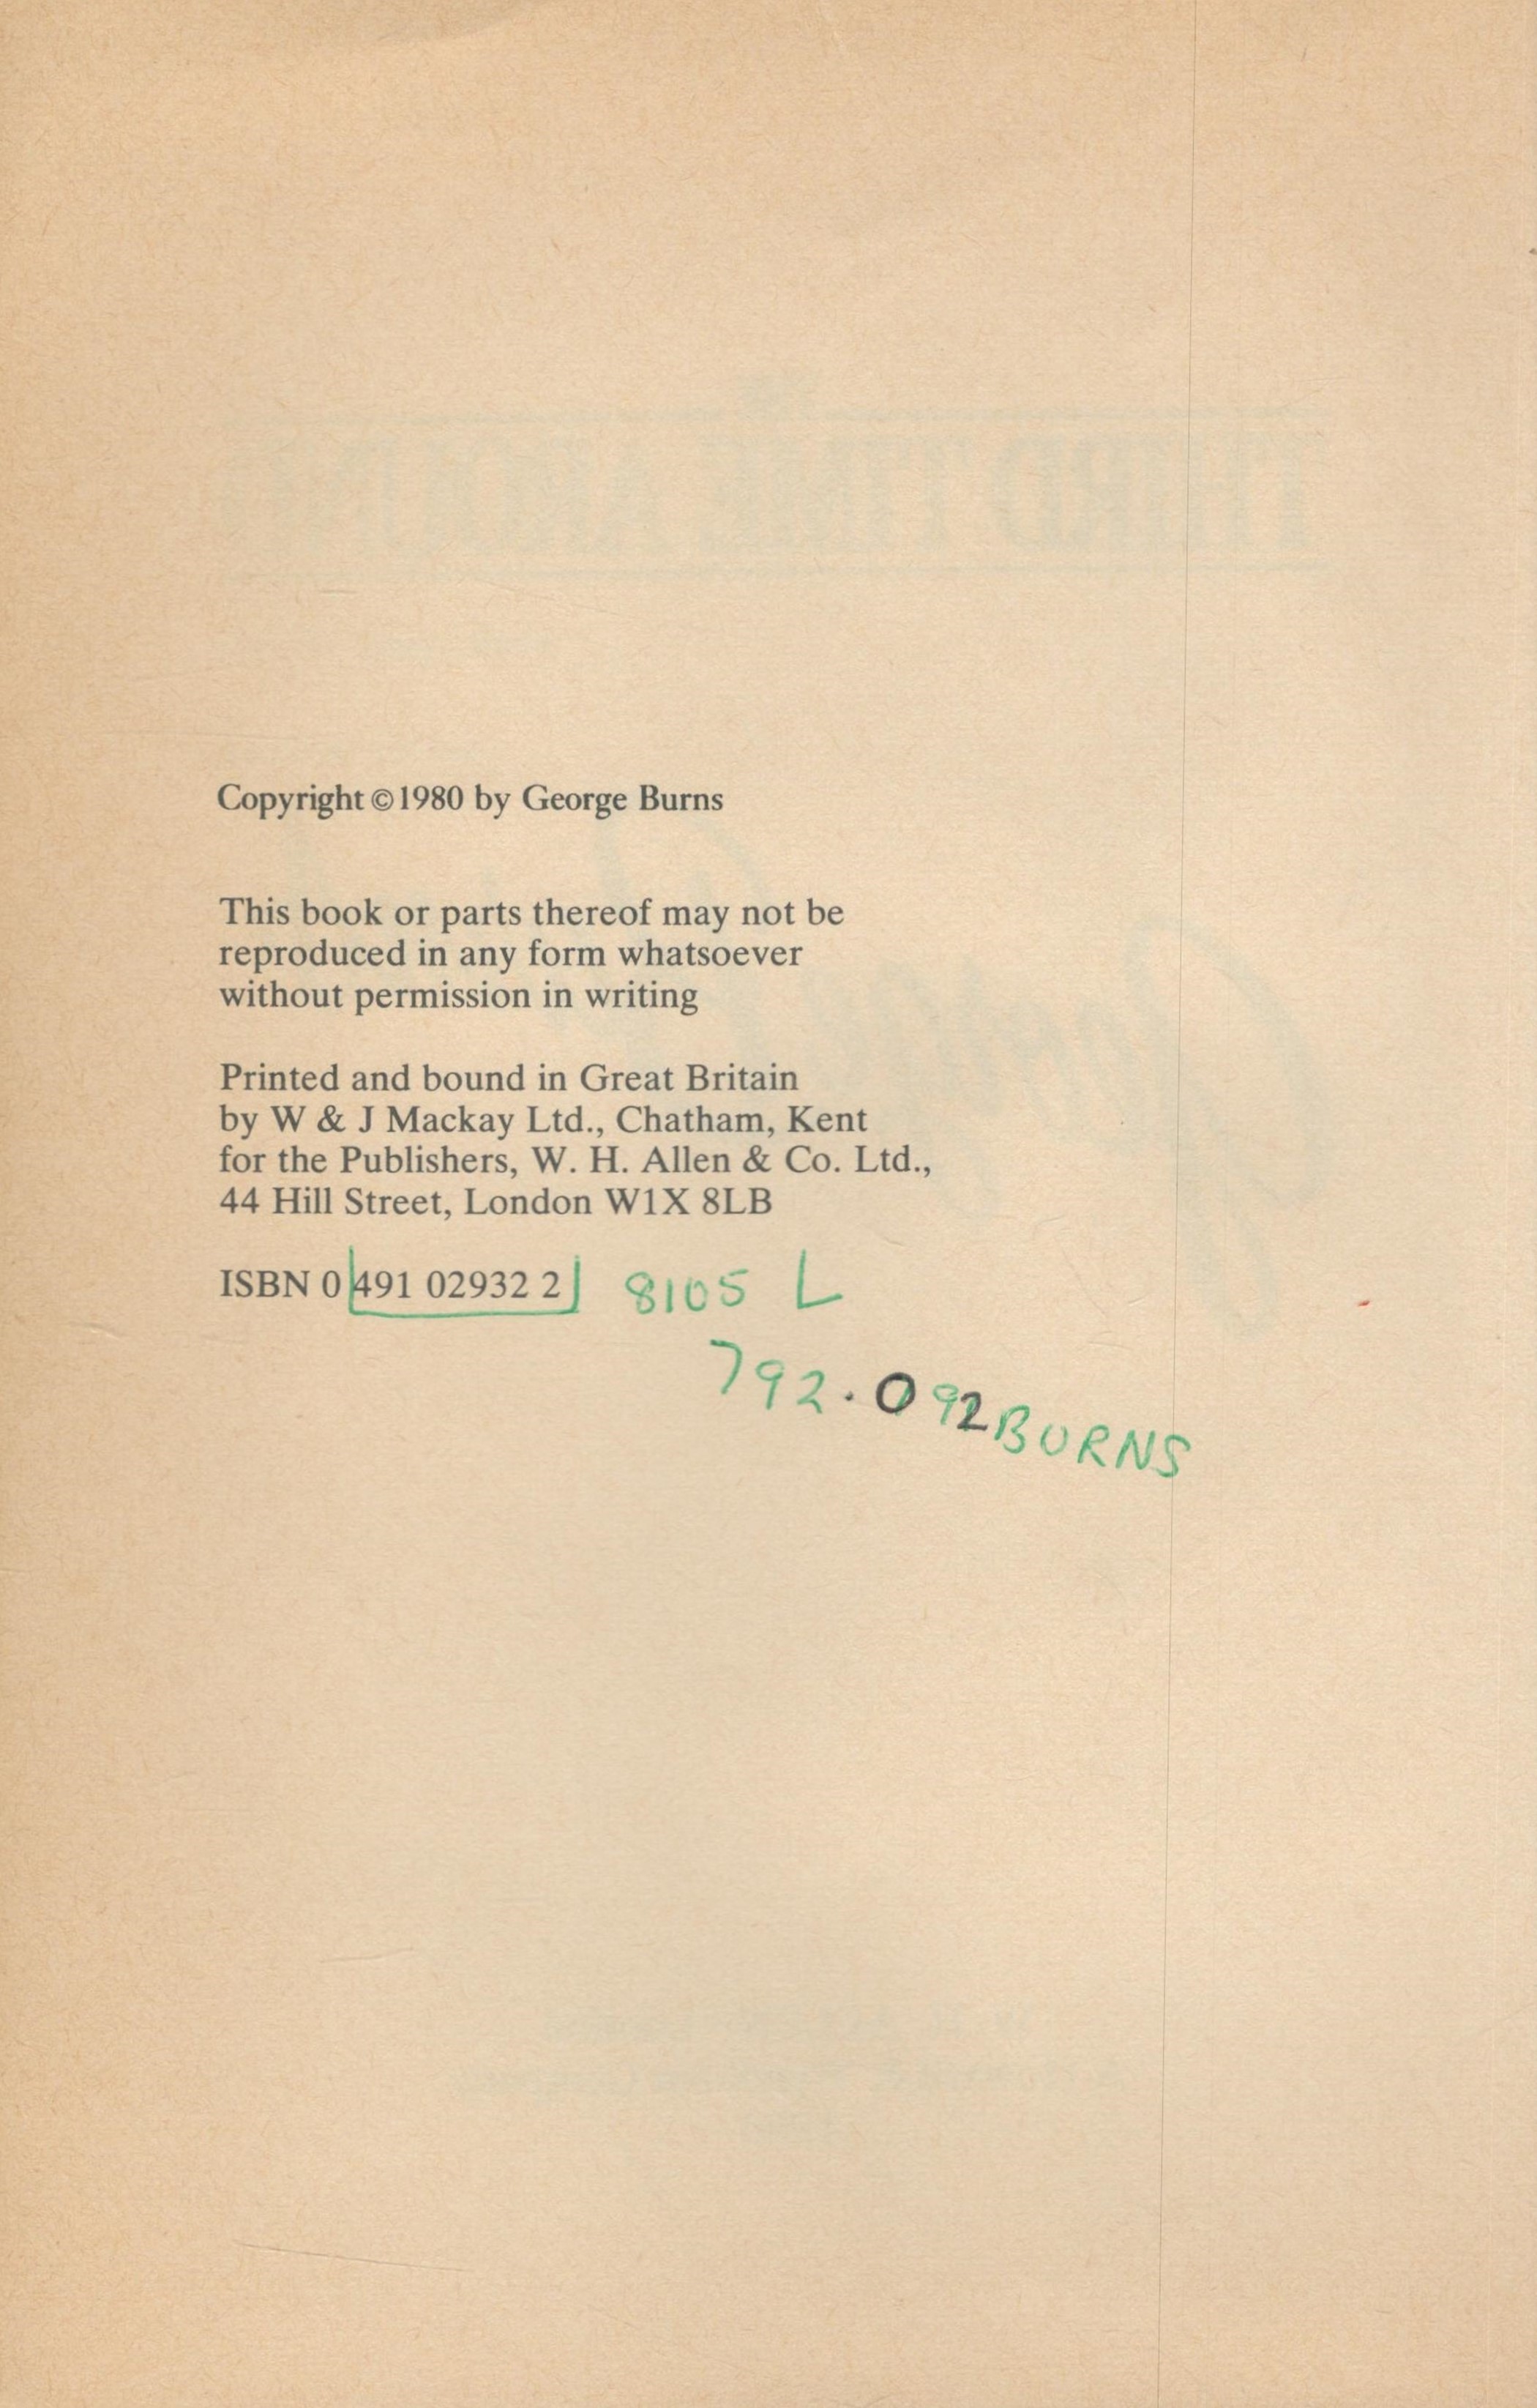 George Burns, The Third Time Around 1980, Westminster Library copy. Unsigned book. Fair Condition. - Image 3 of 3